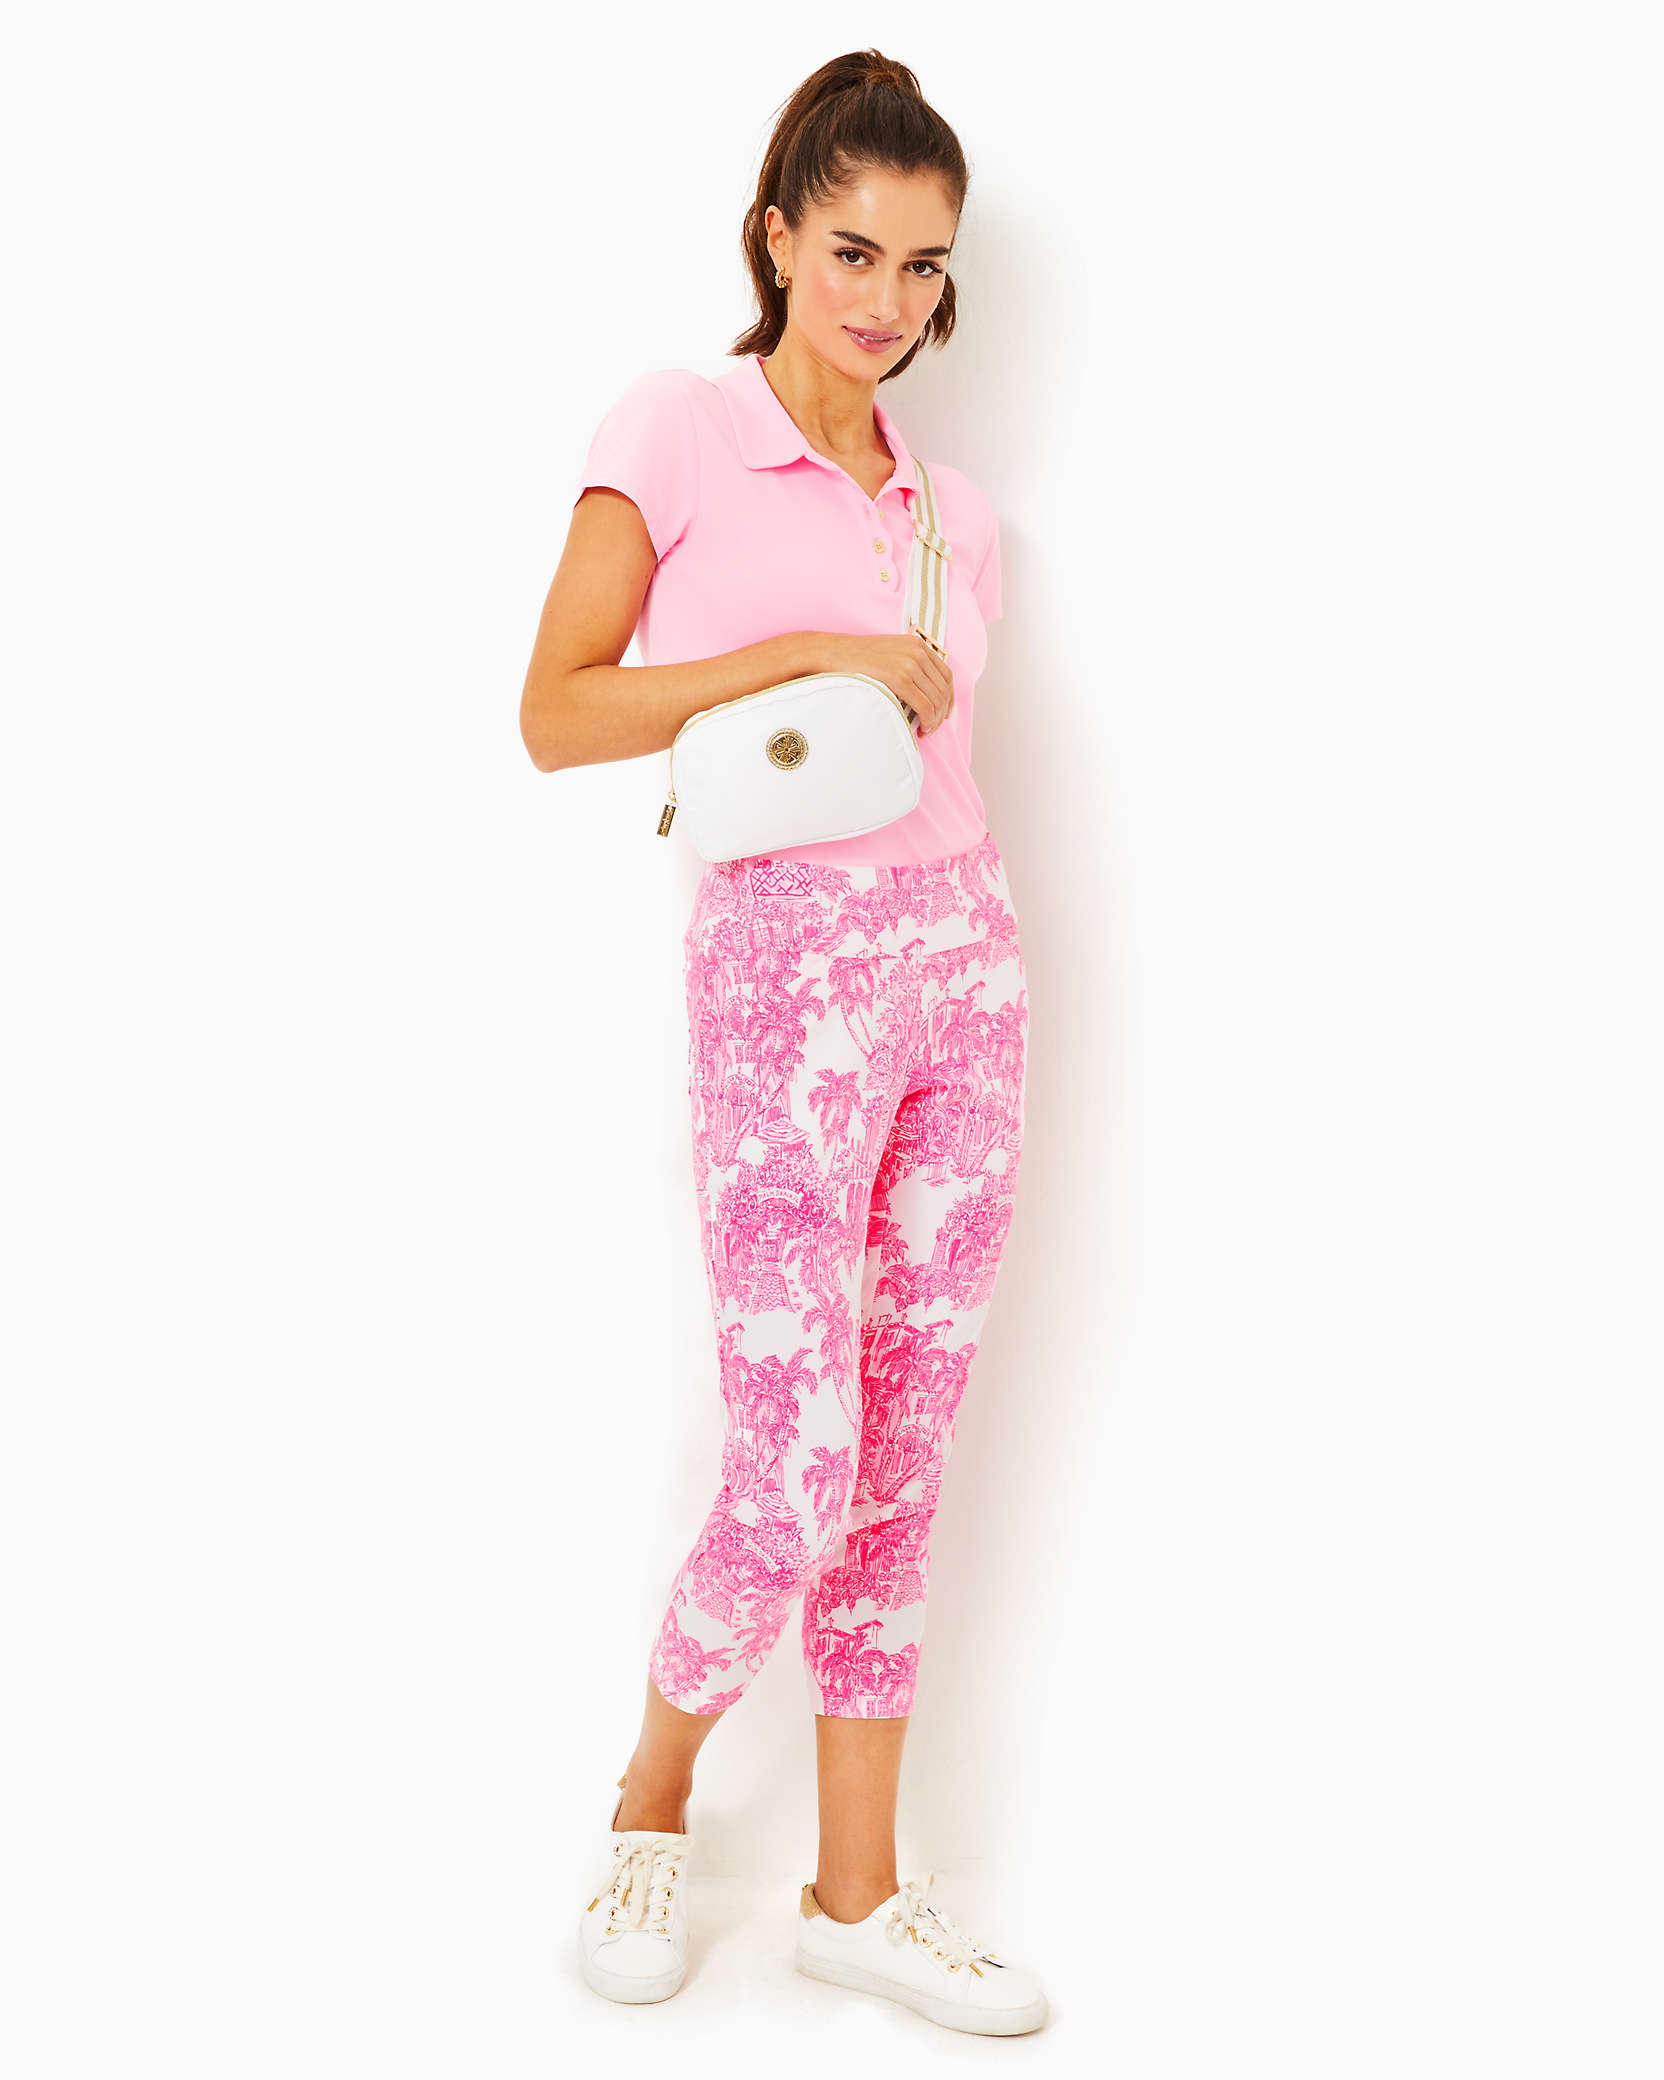 Lilly Pulitzer Upf 50+ Luxletic 25" Corso Crop Pant In Resort White Pb Anniversary Toile Golf